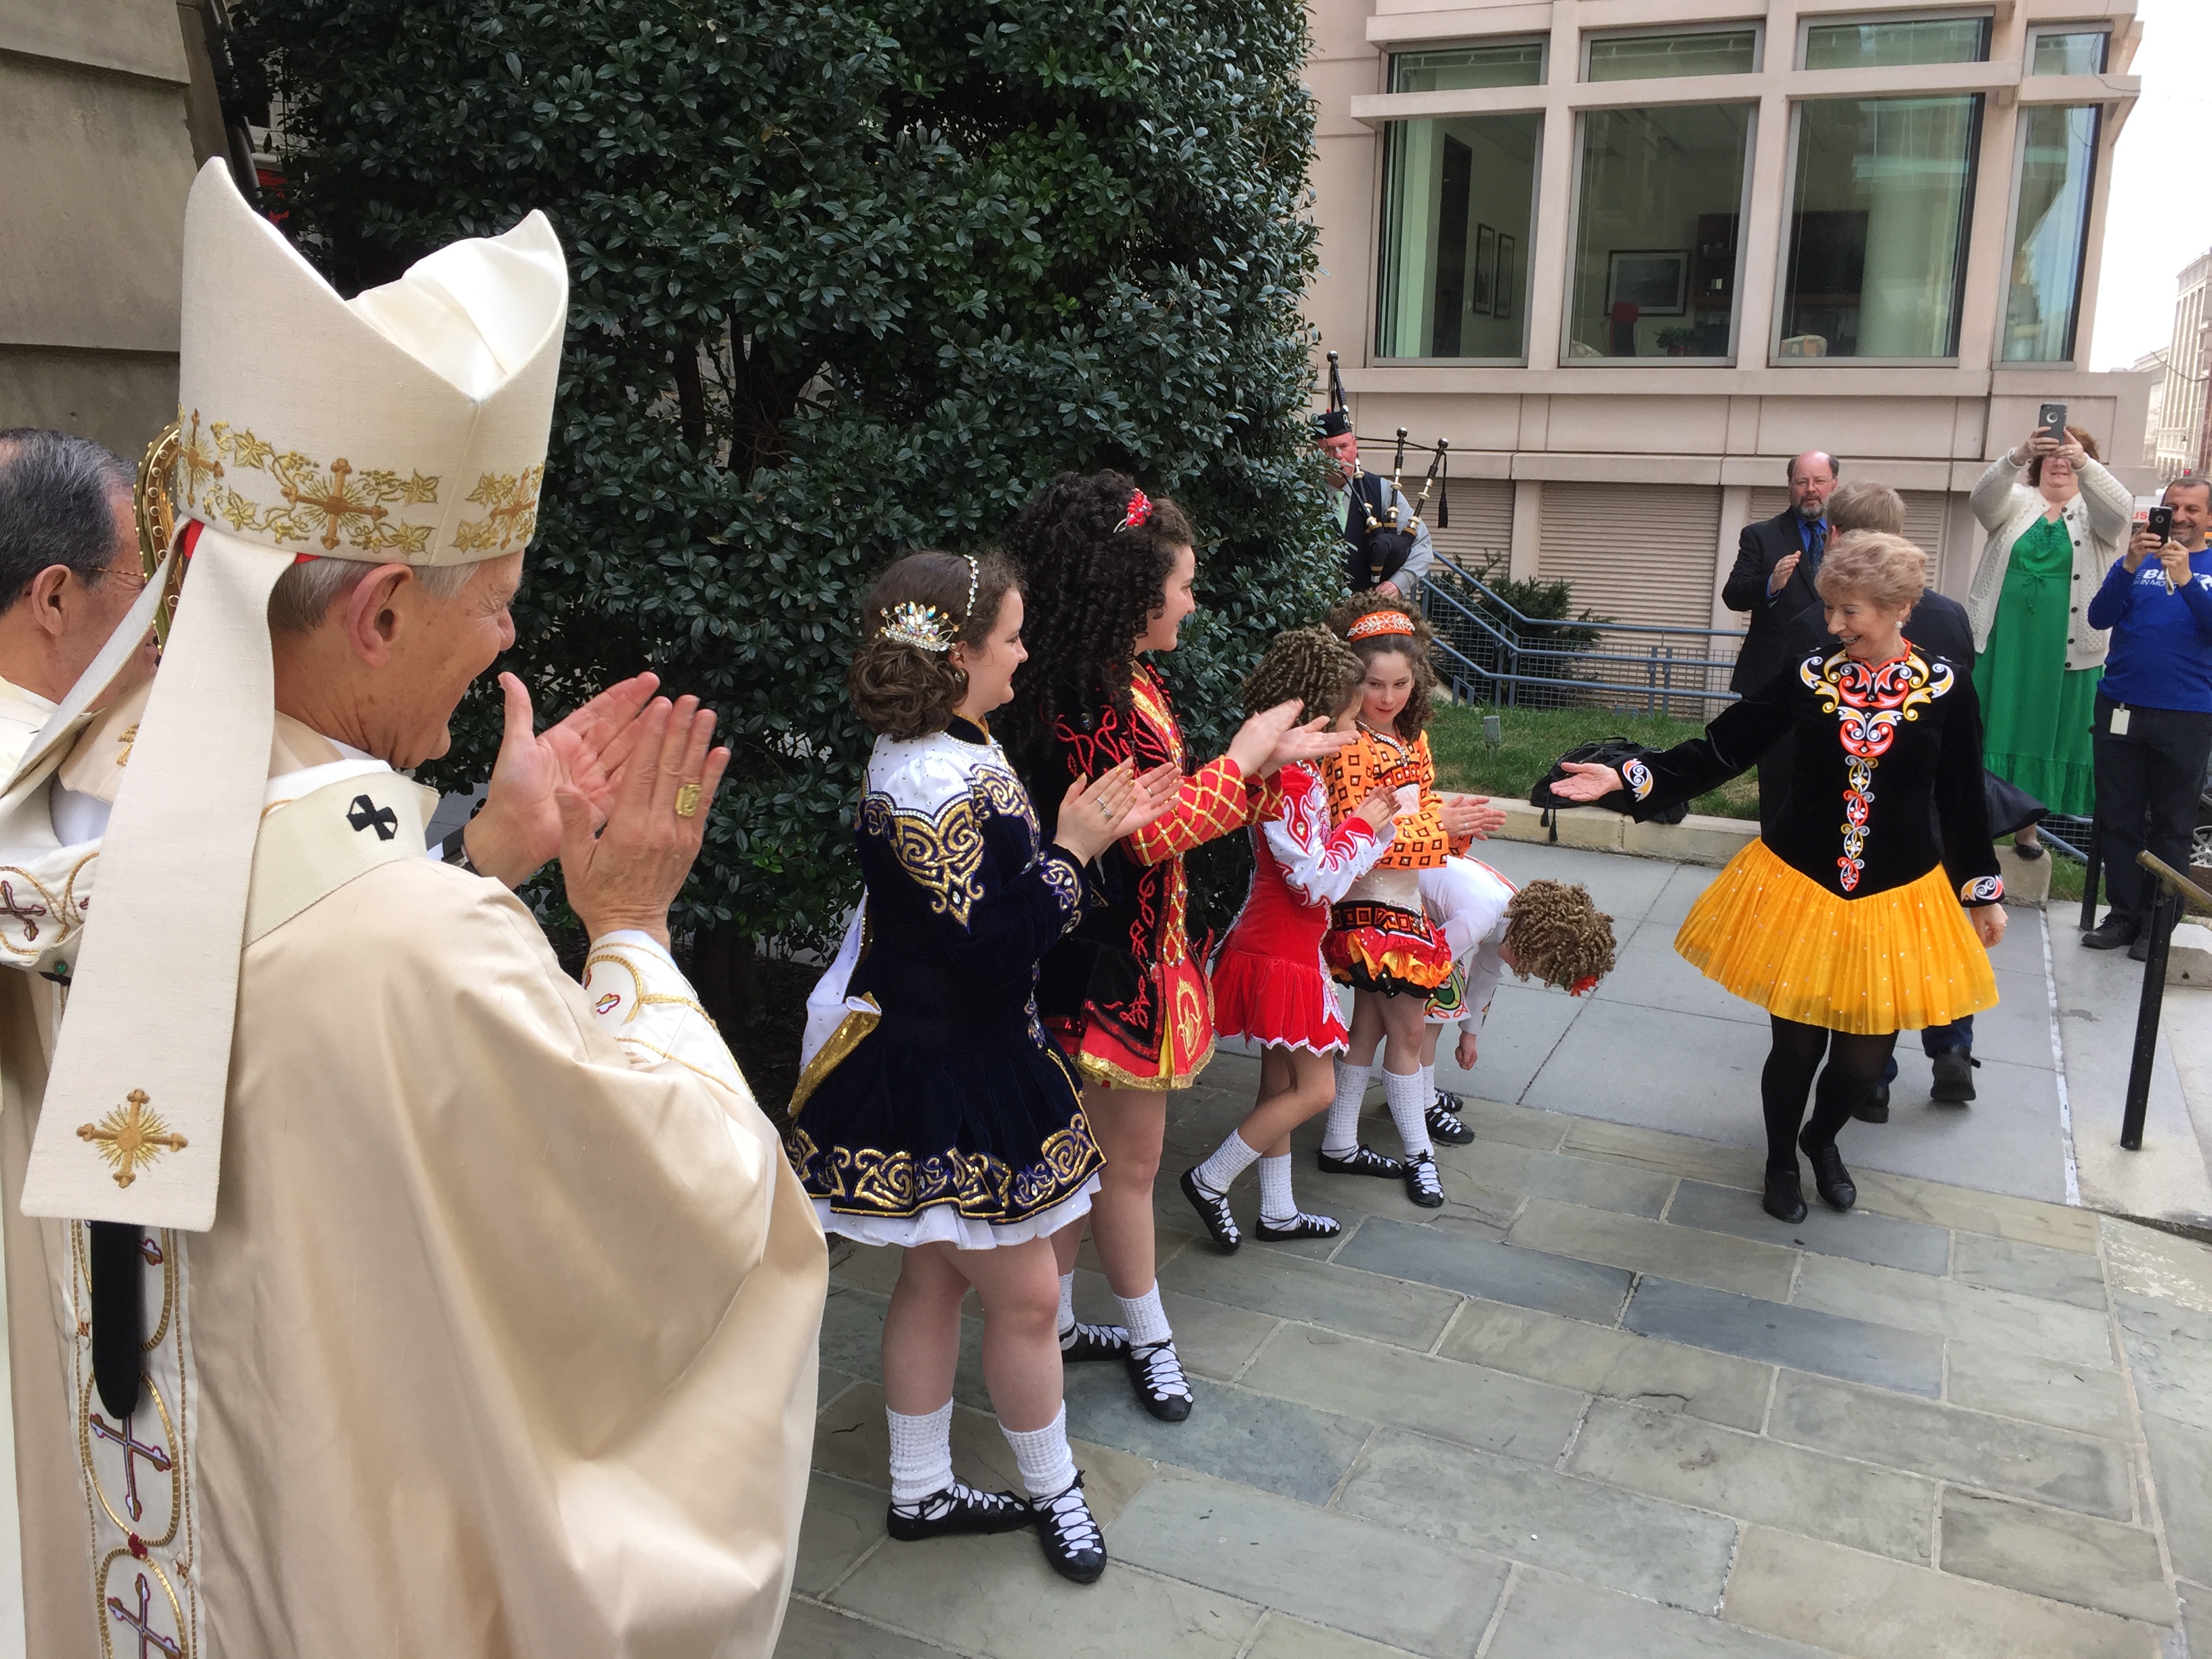 D.C. cardinal preaches St. Patrick’s message on holiday (Photos)